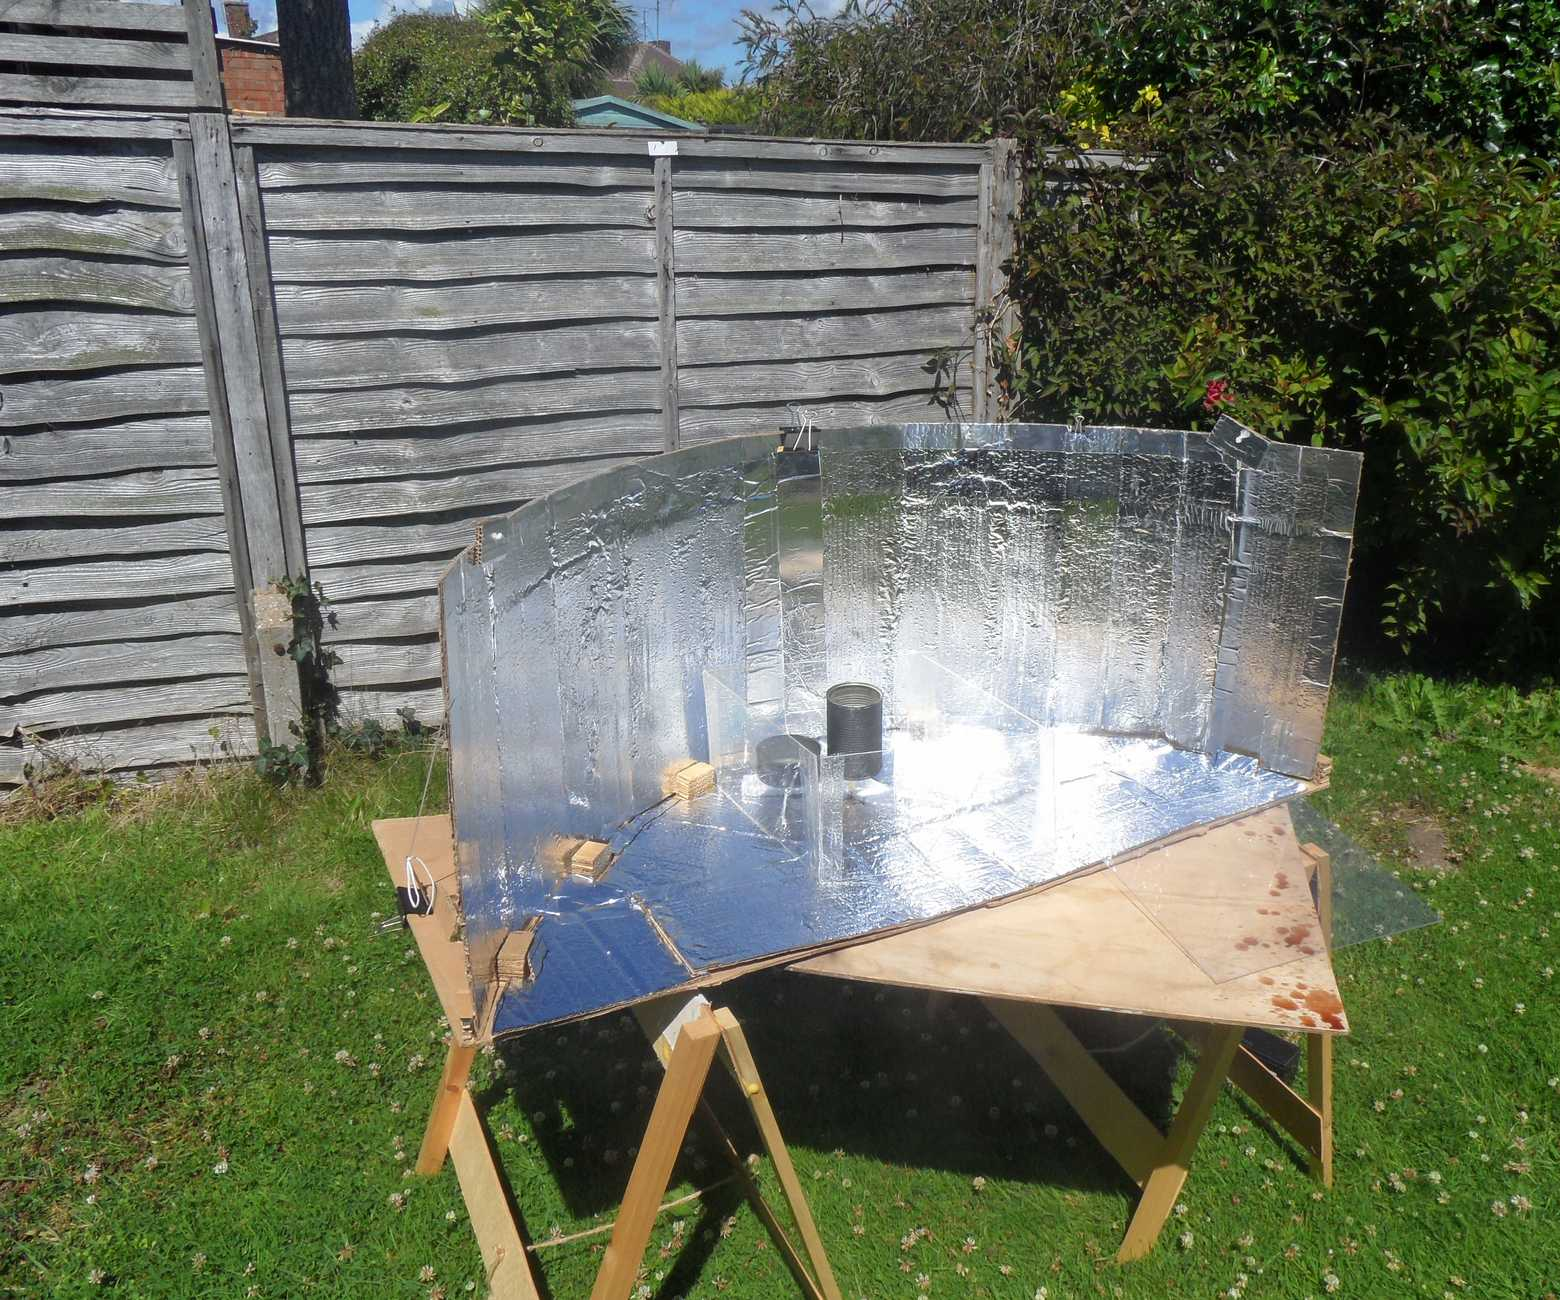 The Parapanel Solar Cooker